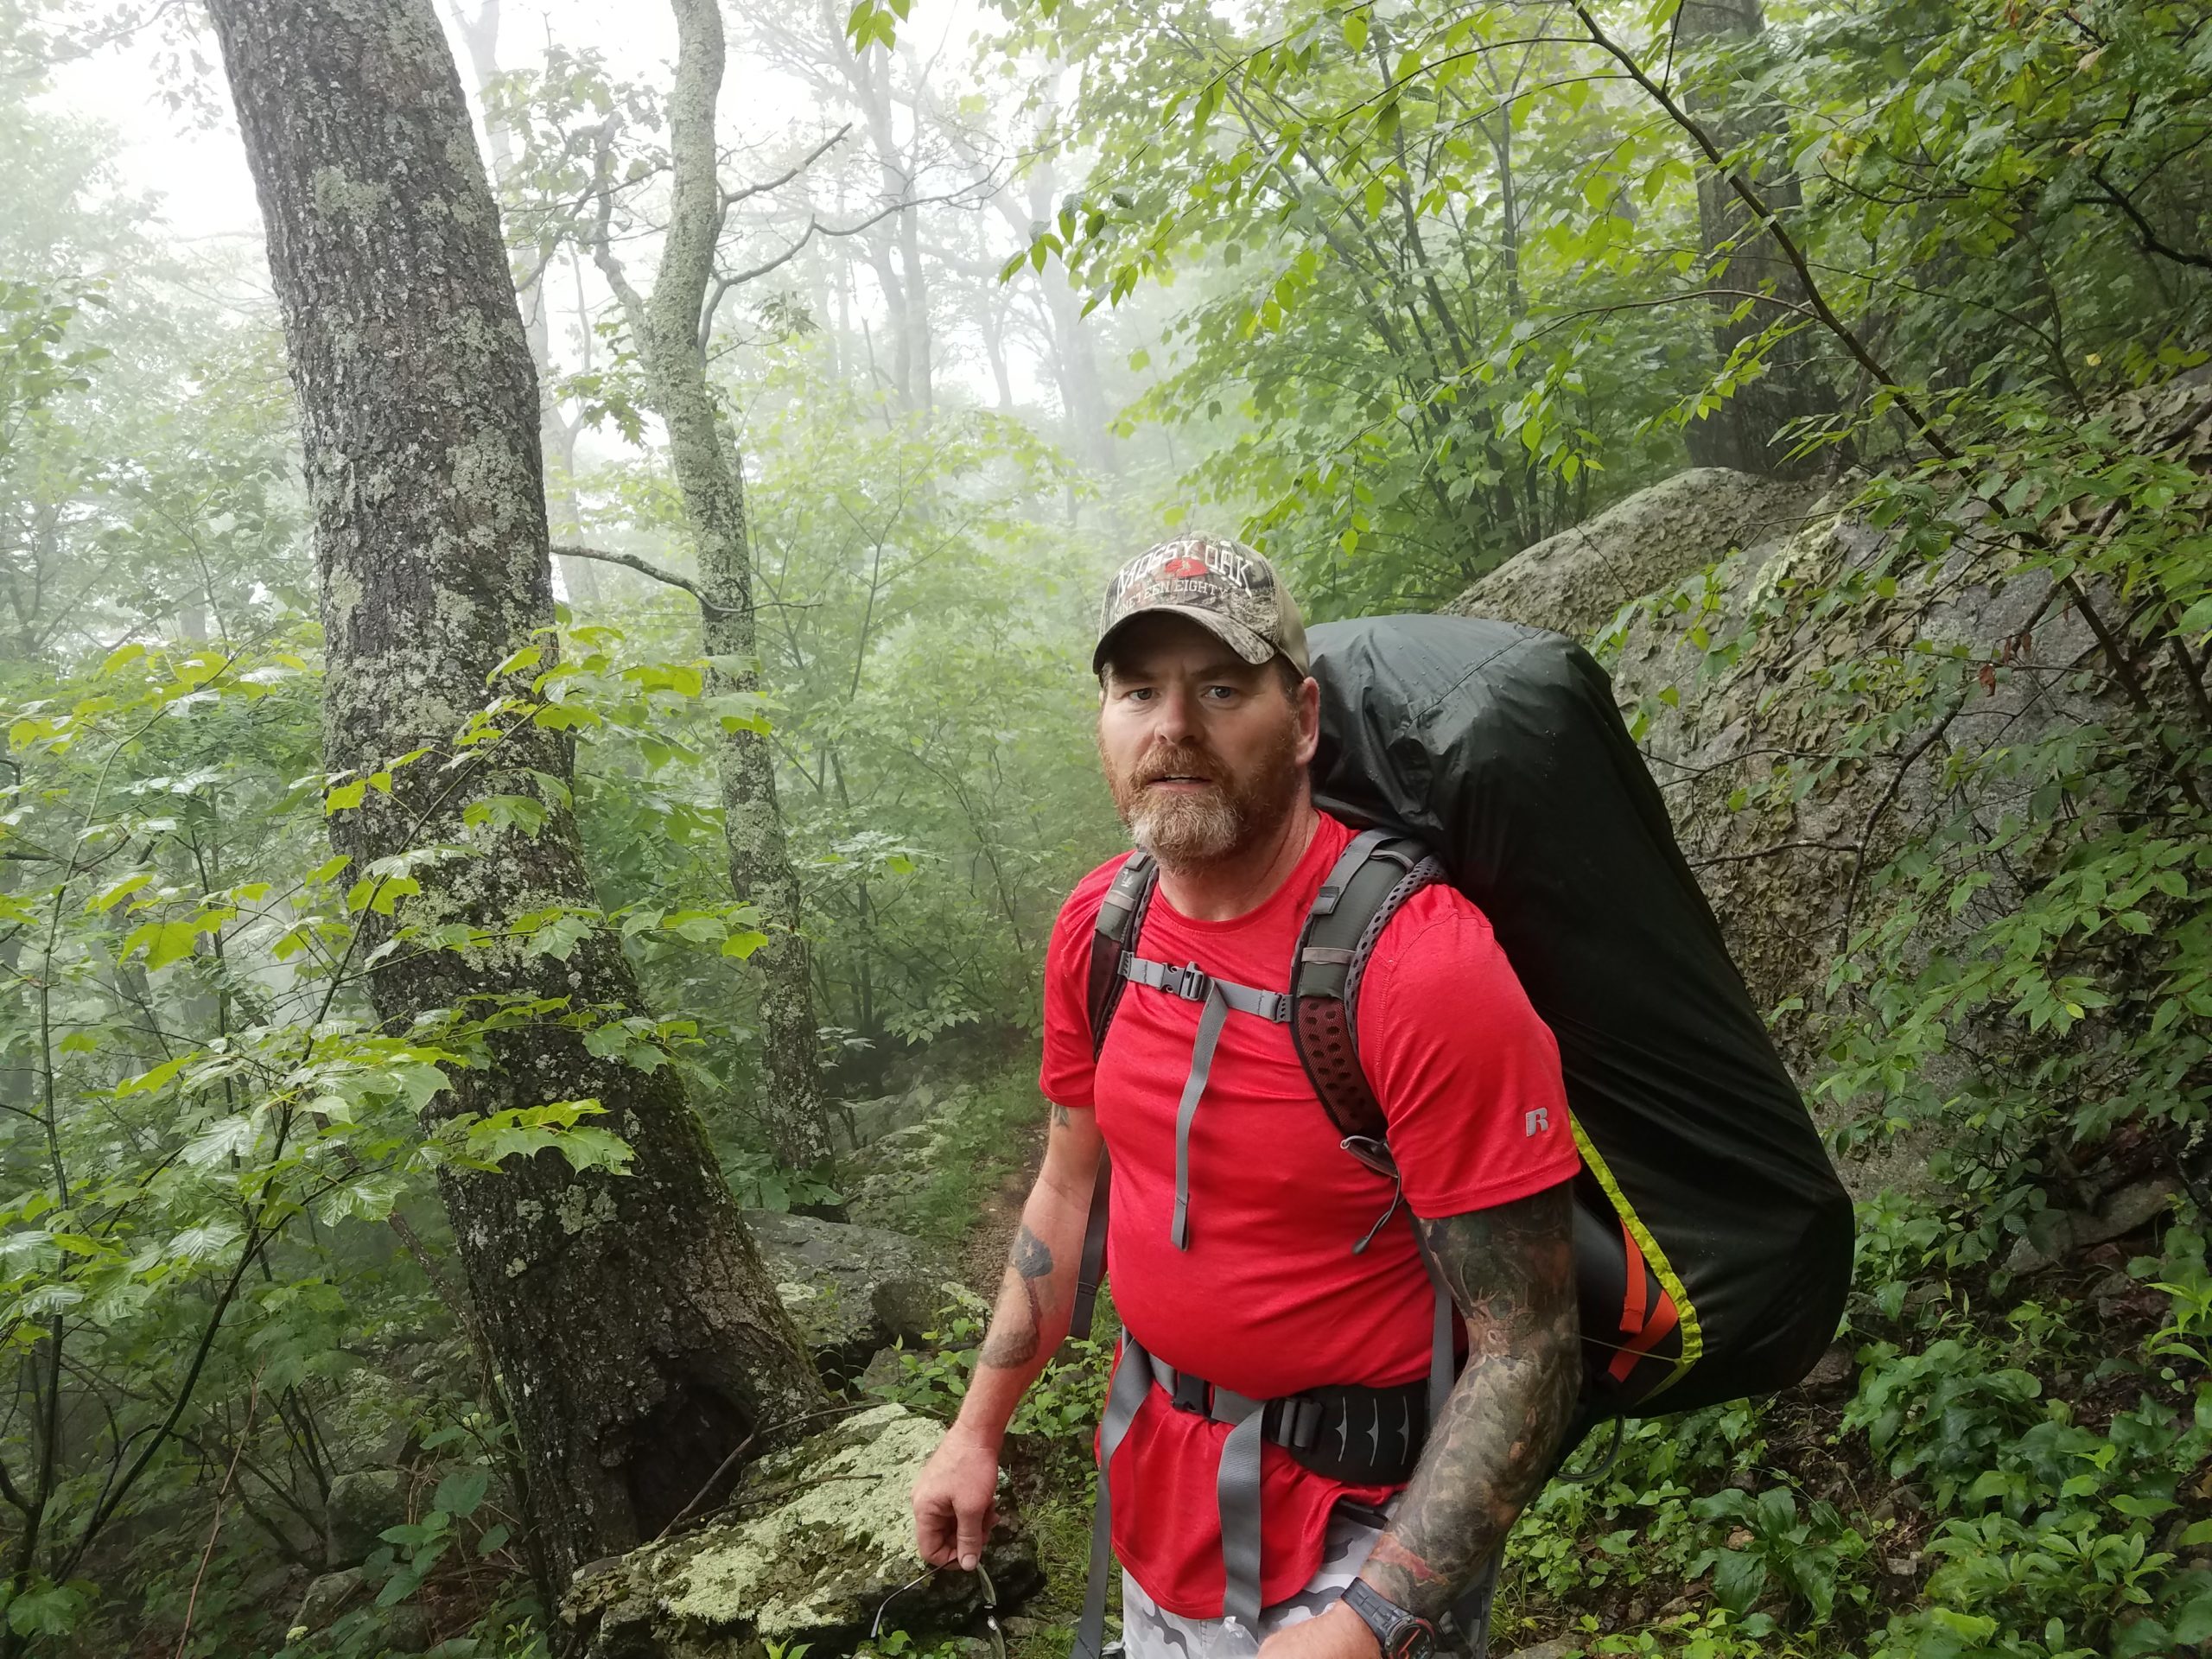 Hiker Will Face Challenges of Parkinson’s and Appalachian Trail